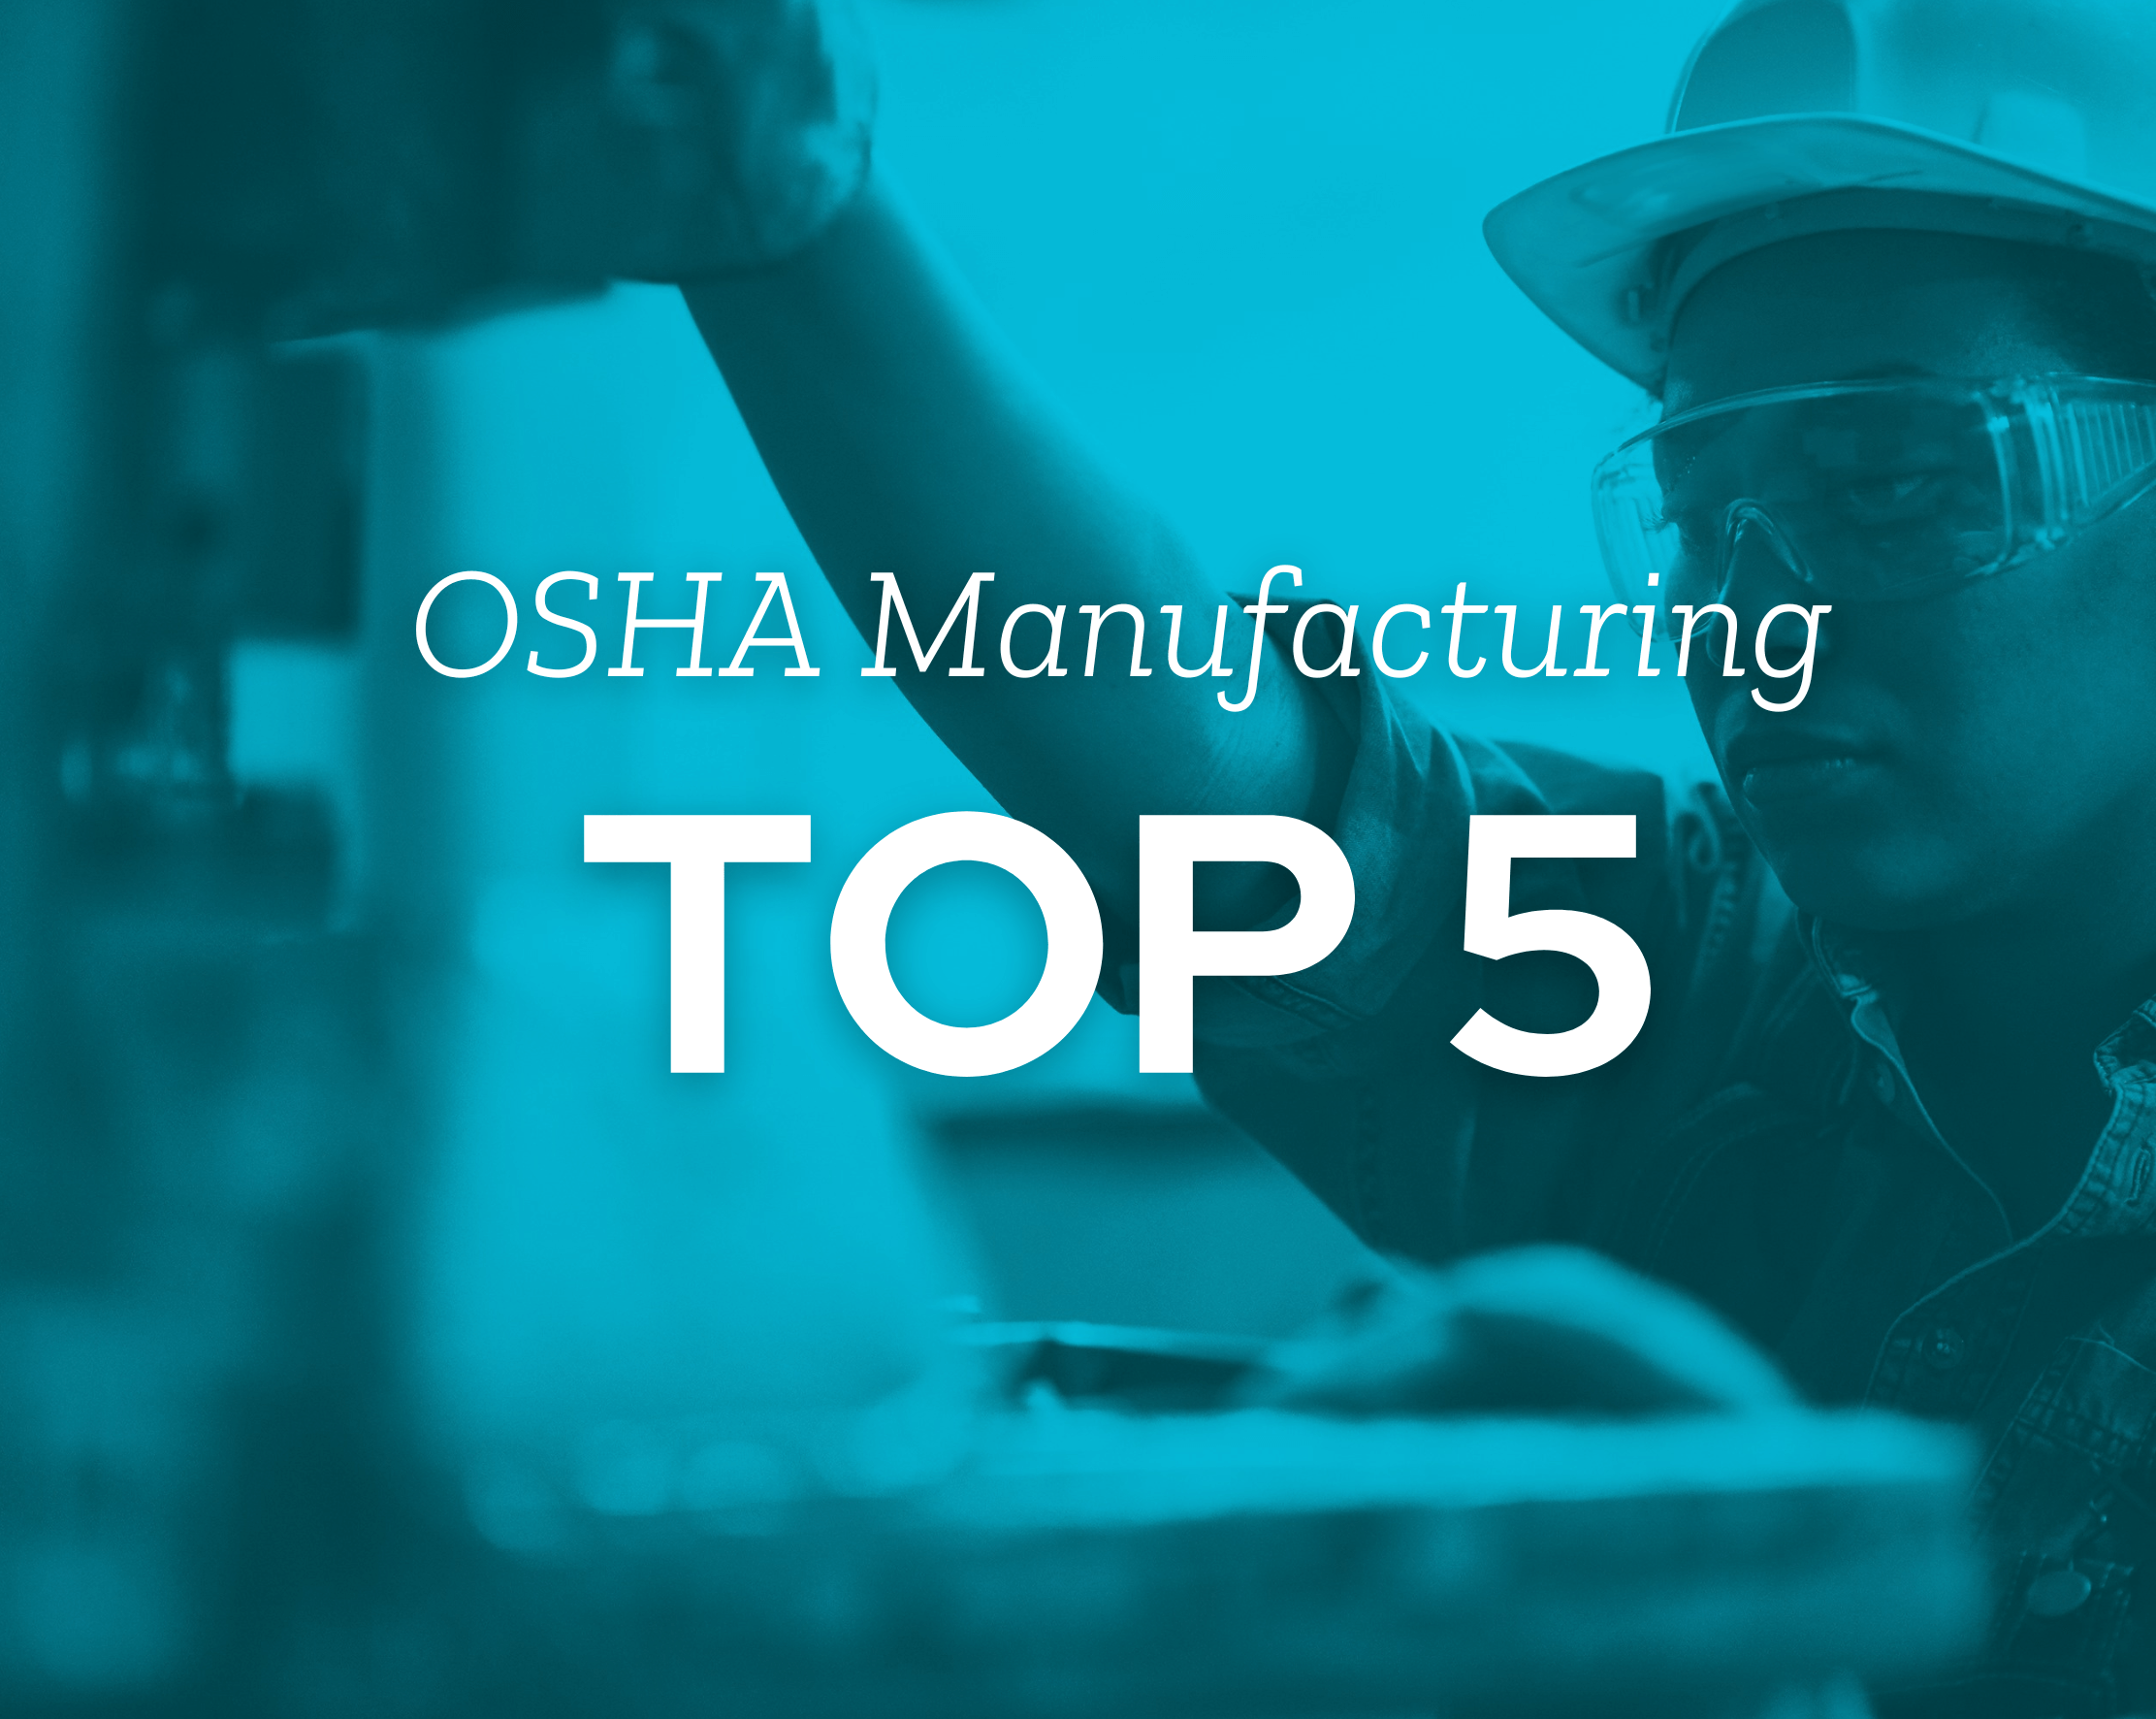 Top OSHA Violations for Manufacturing – Let’s Look at the Top 5